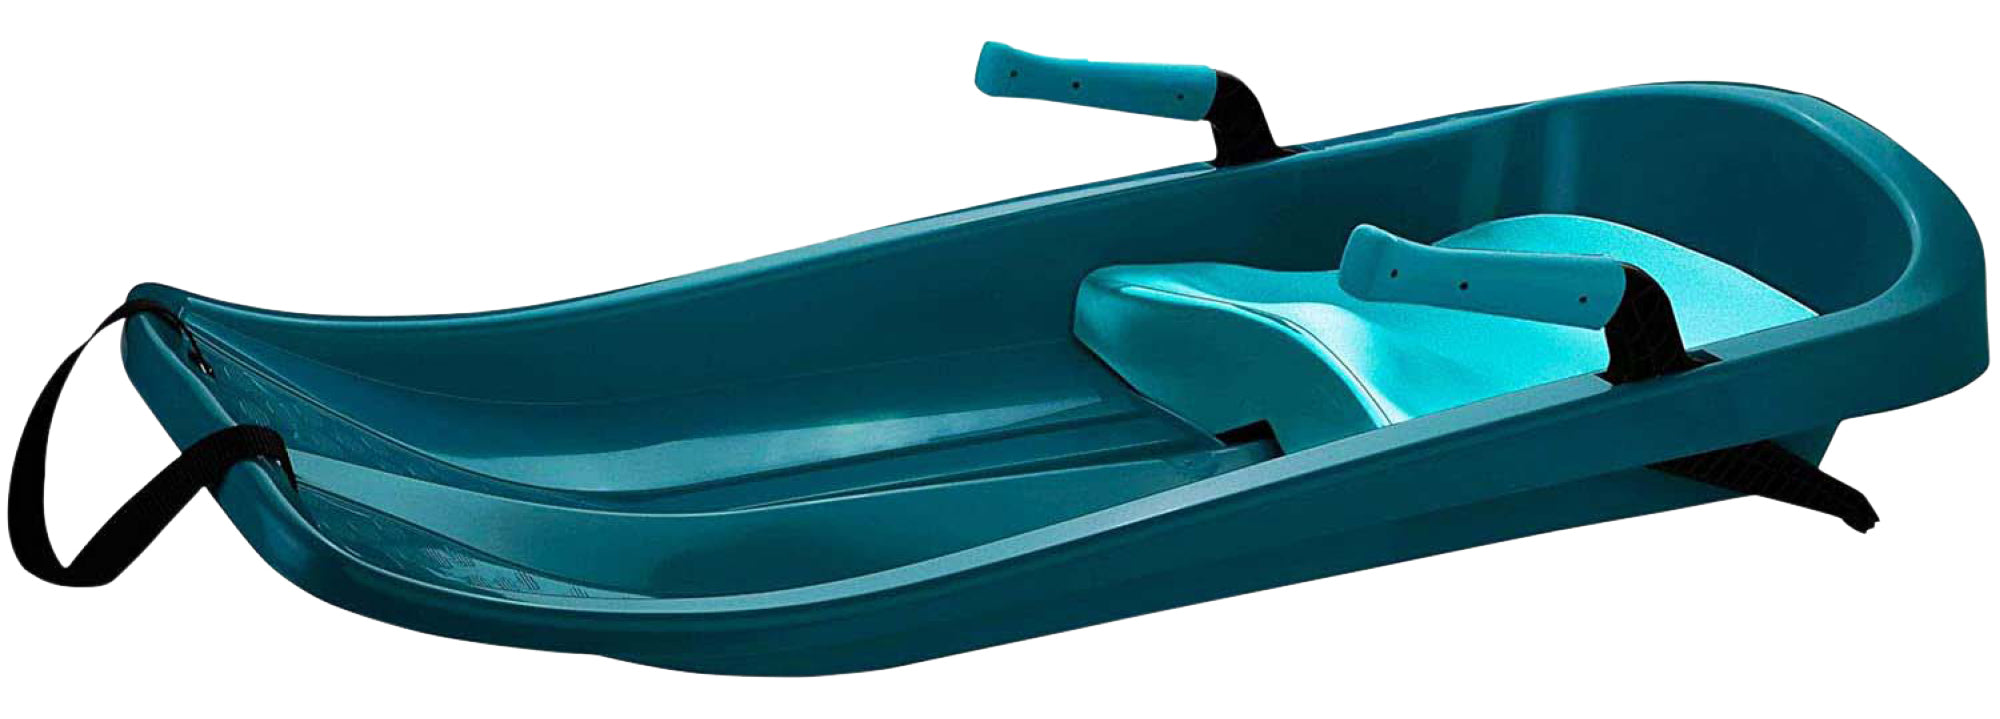 Gizmo Riders Tron Bobsled for Kids, Ages 3+, Max 120lbs